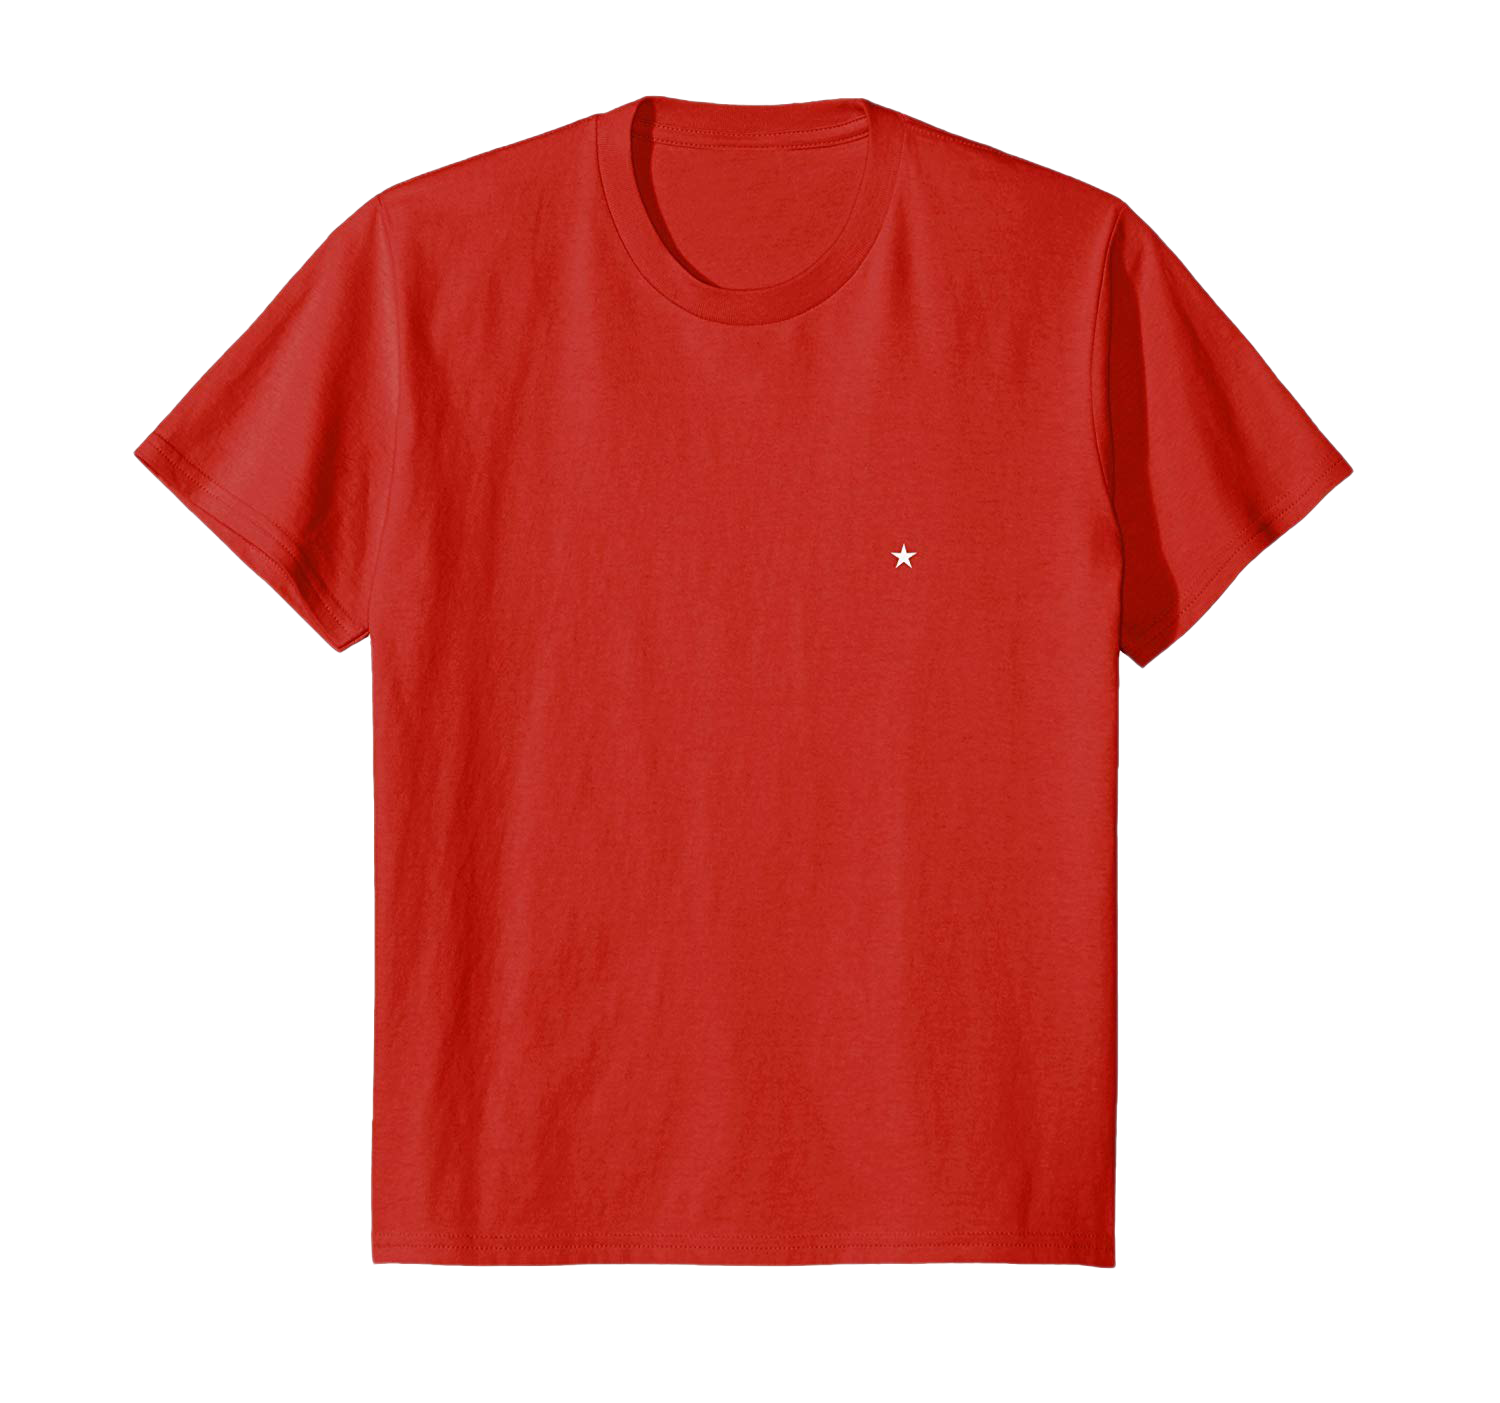 Plain Red T-Shirt PNG High-Quality Image